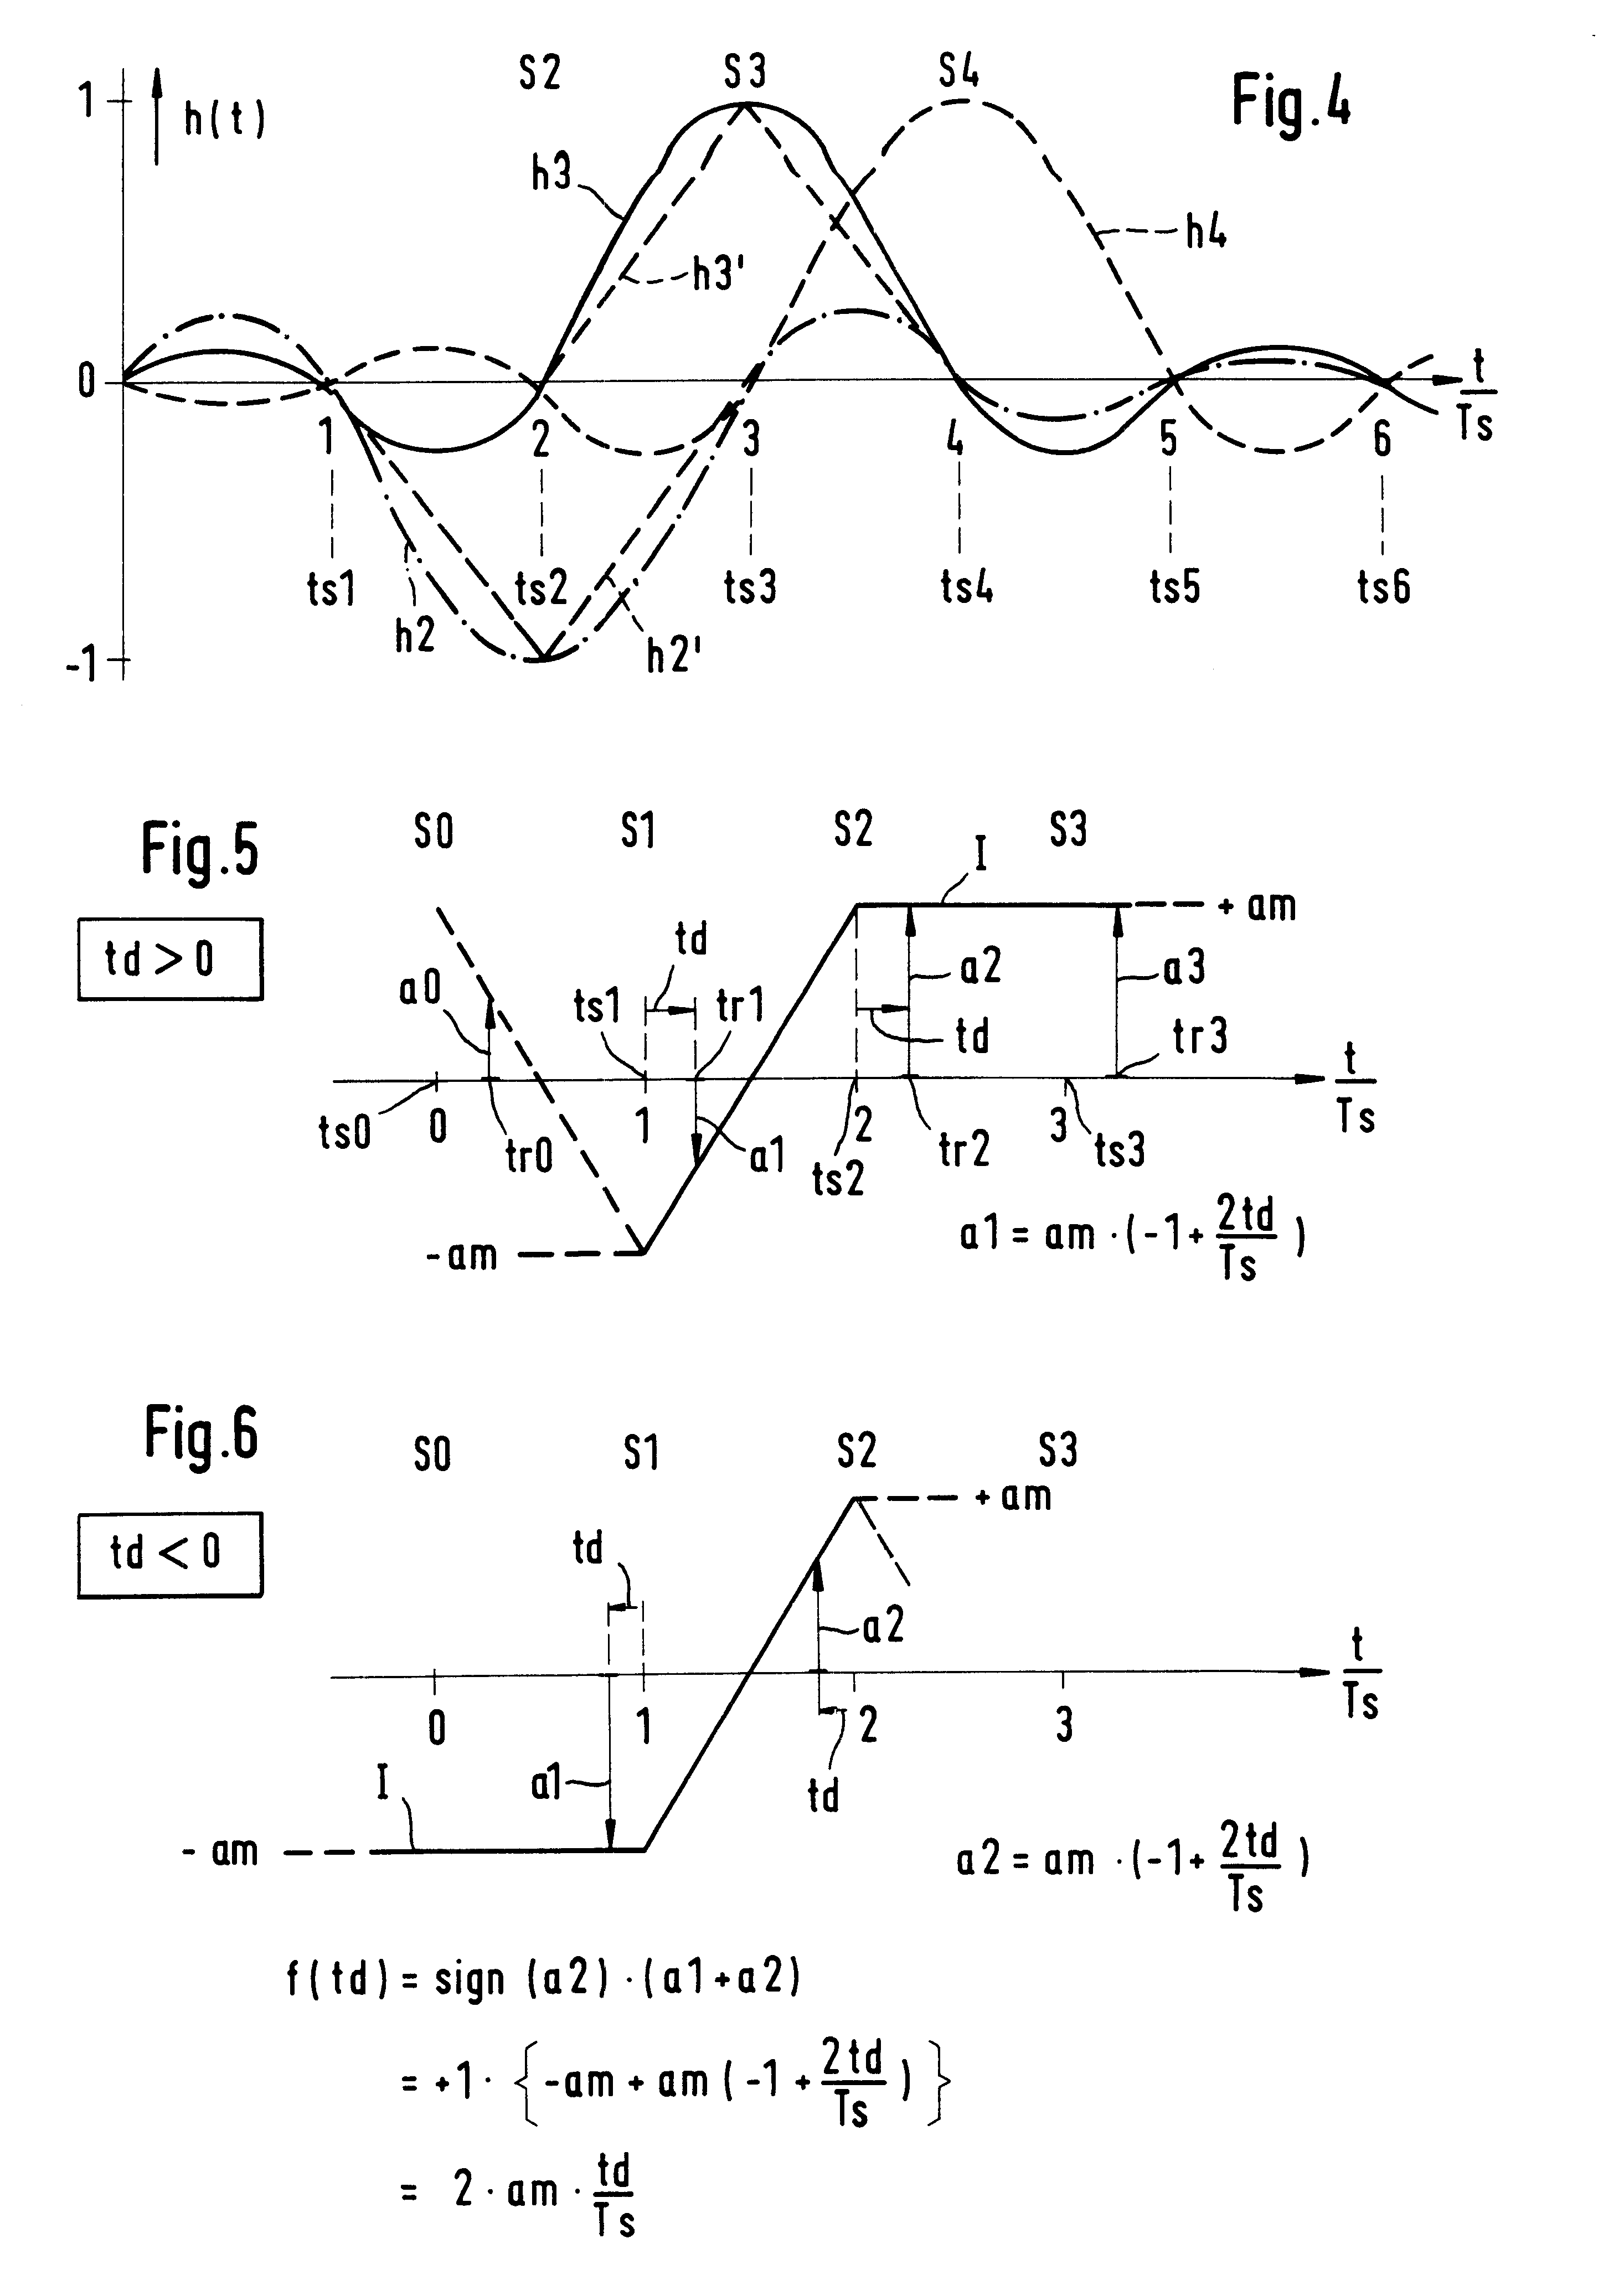 Sampling control loop for a receiver for digitally transmitted signals